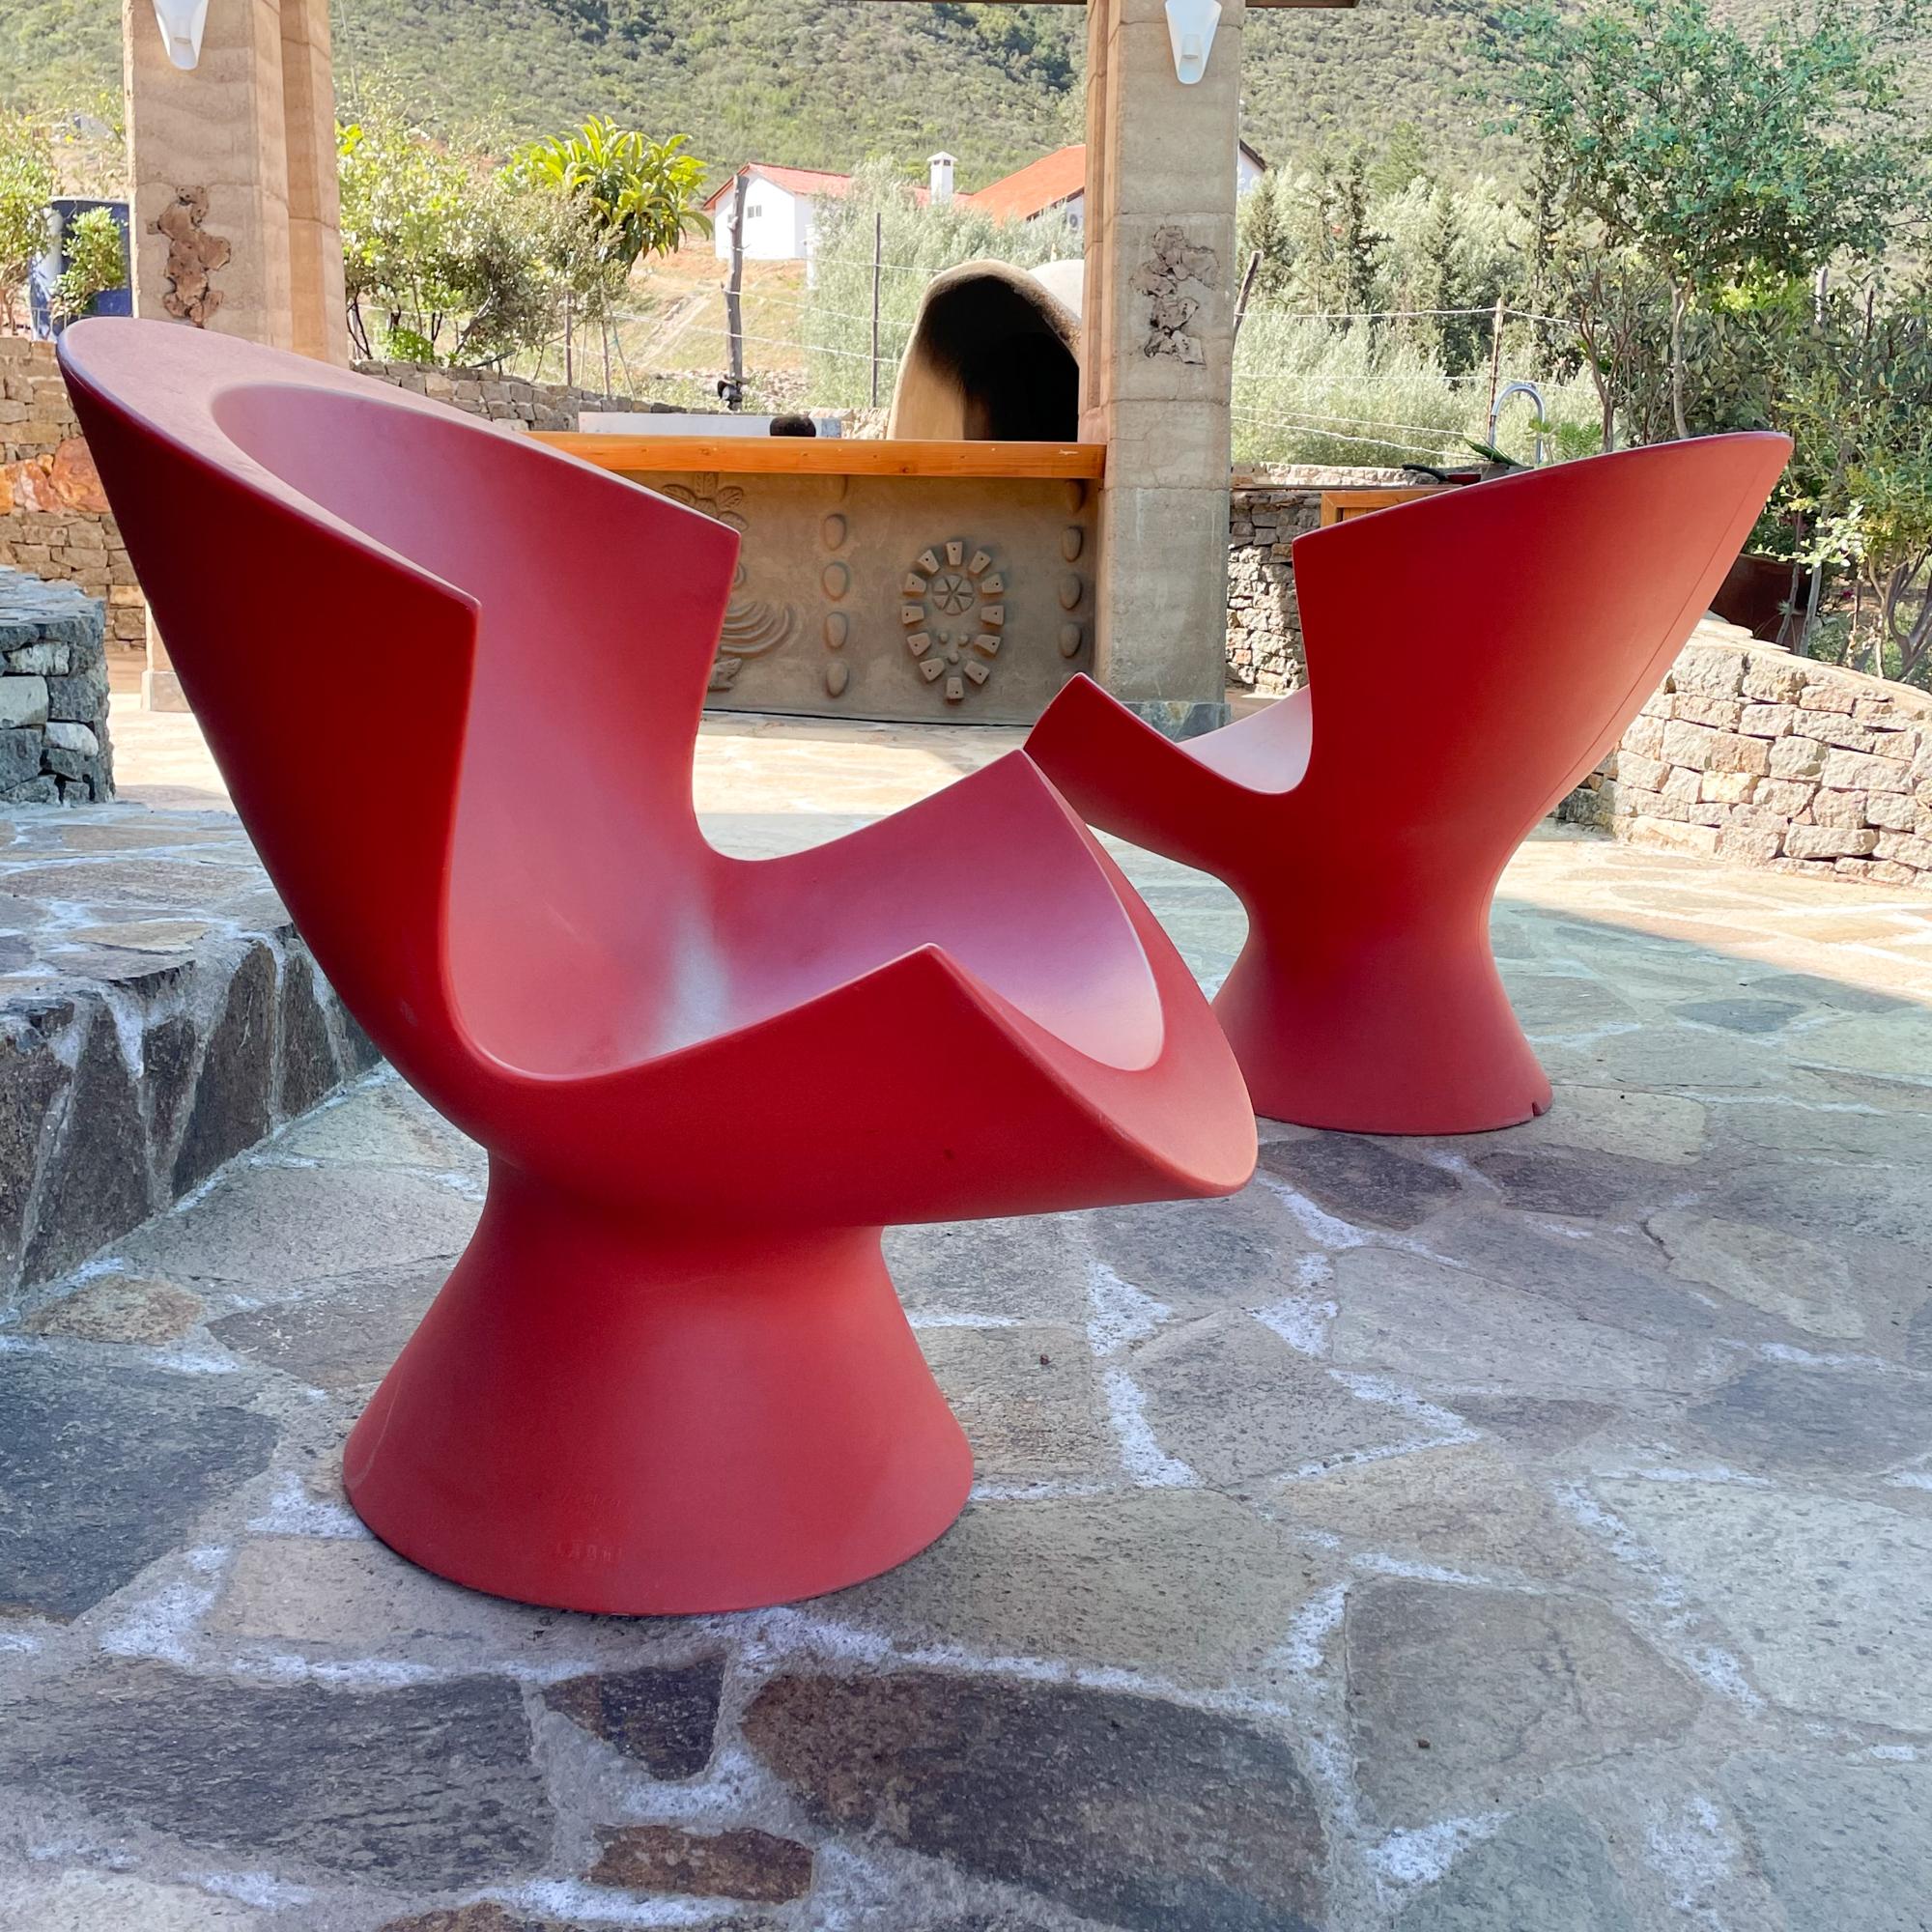 For your consideration a set of two (2) Kite chairs designed by Karim Rashid for Label.

Beautiful modern sculptural design in hot pink color. Made of high quality plastic, these chairs are perfect for the outdoors, clever design which includes a